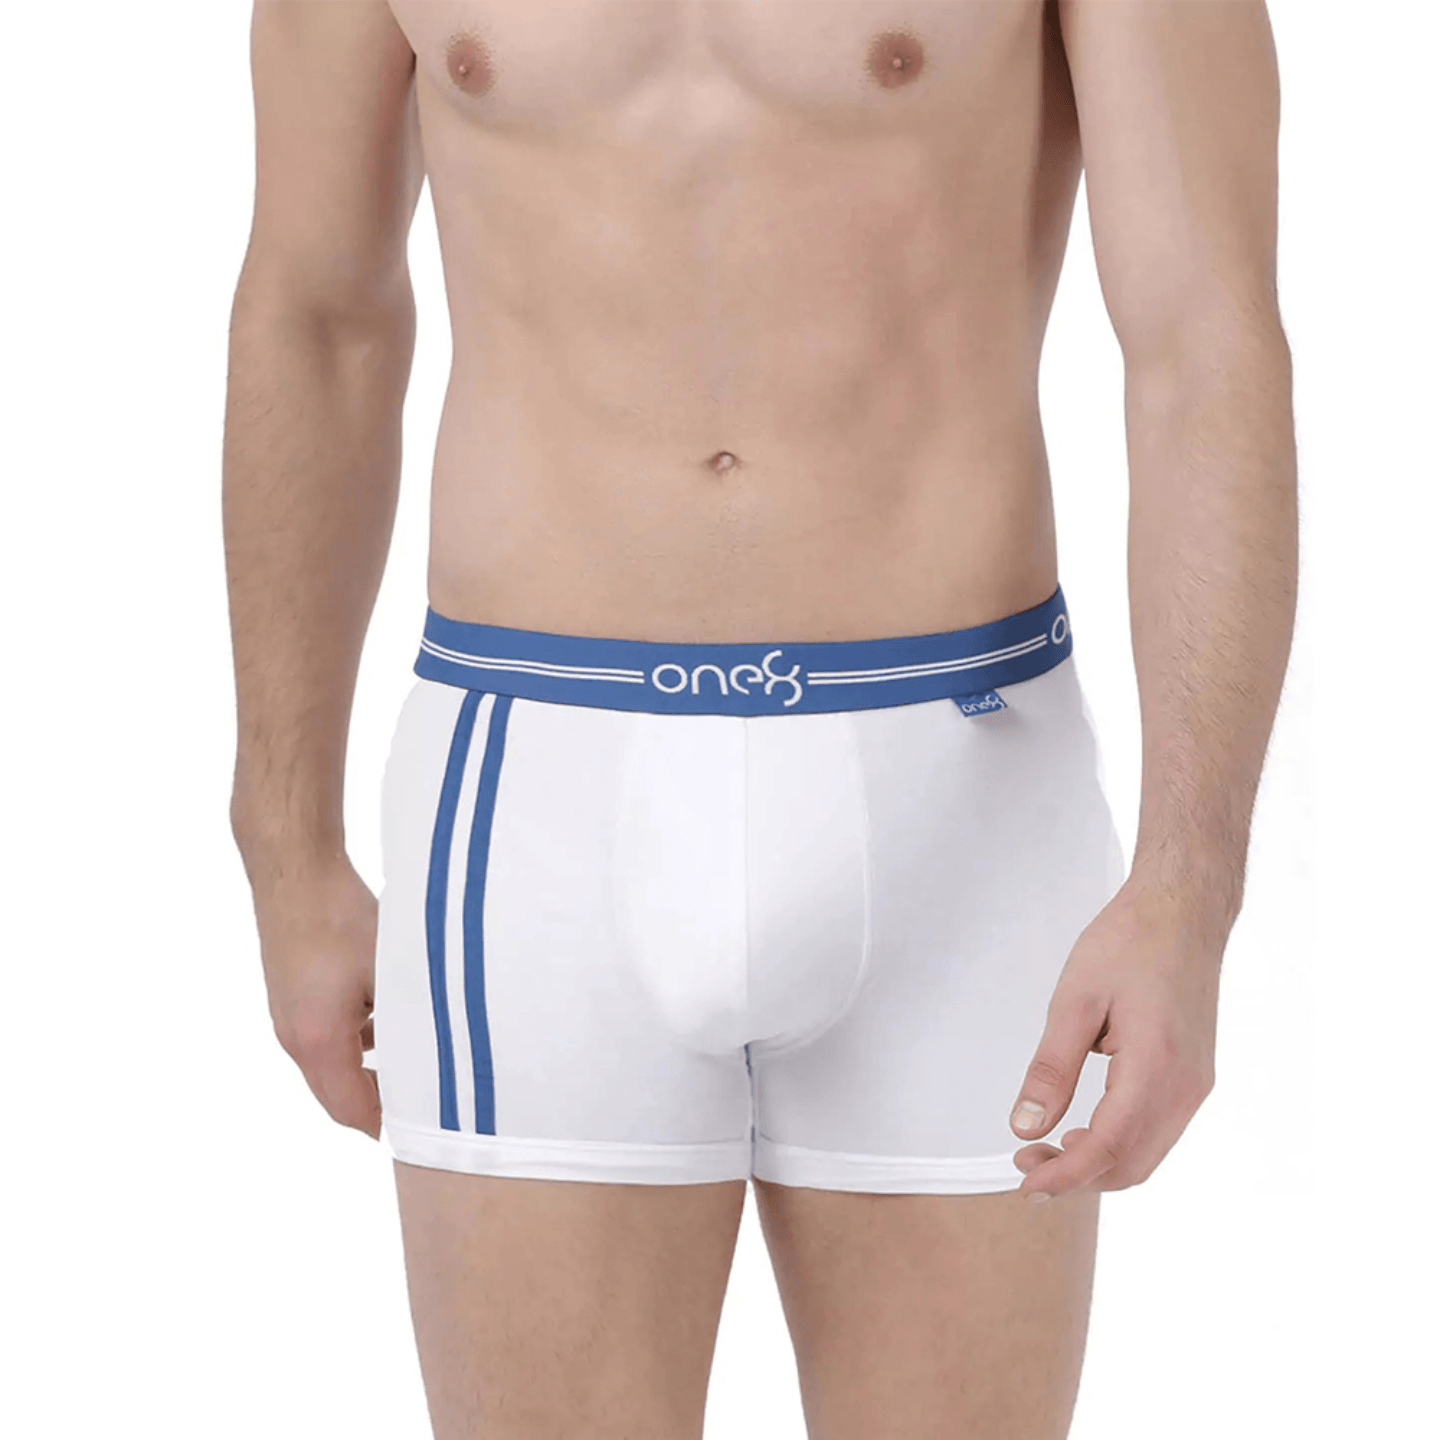 One8 Premium Cotton Stretch Trunk 206 Pack Of 3  InnerMan